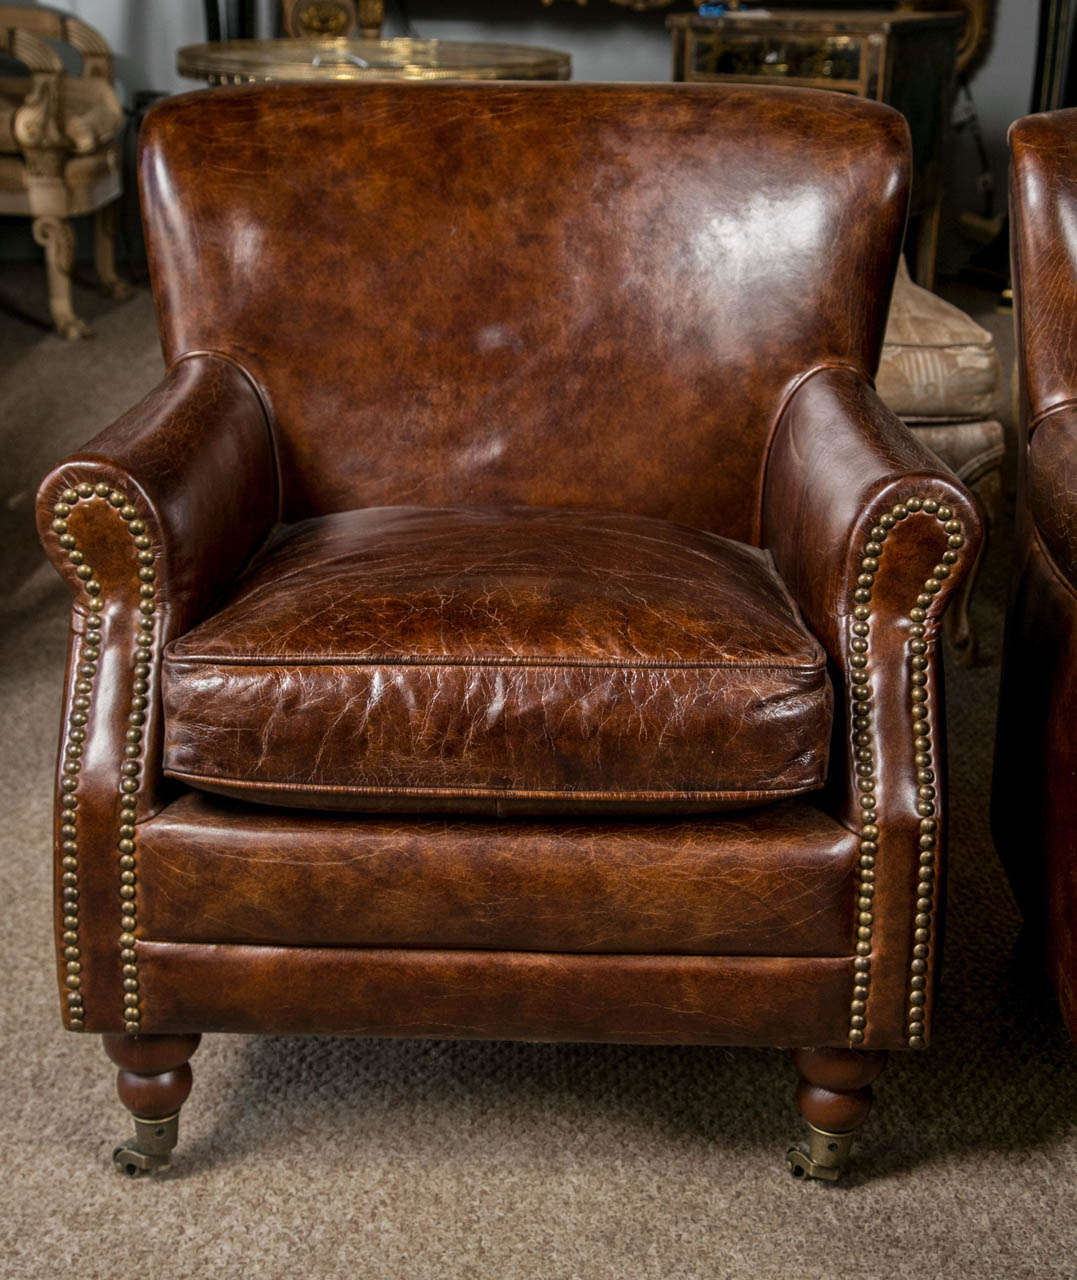 A fine pair of brown leather arm chairs. The whole of a worn brown leather in good condition with nail head arms resting on English ball bun feet and terminating in brass casters. At the time of this posting a group of four chairs are available.